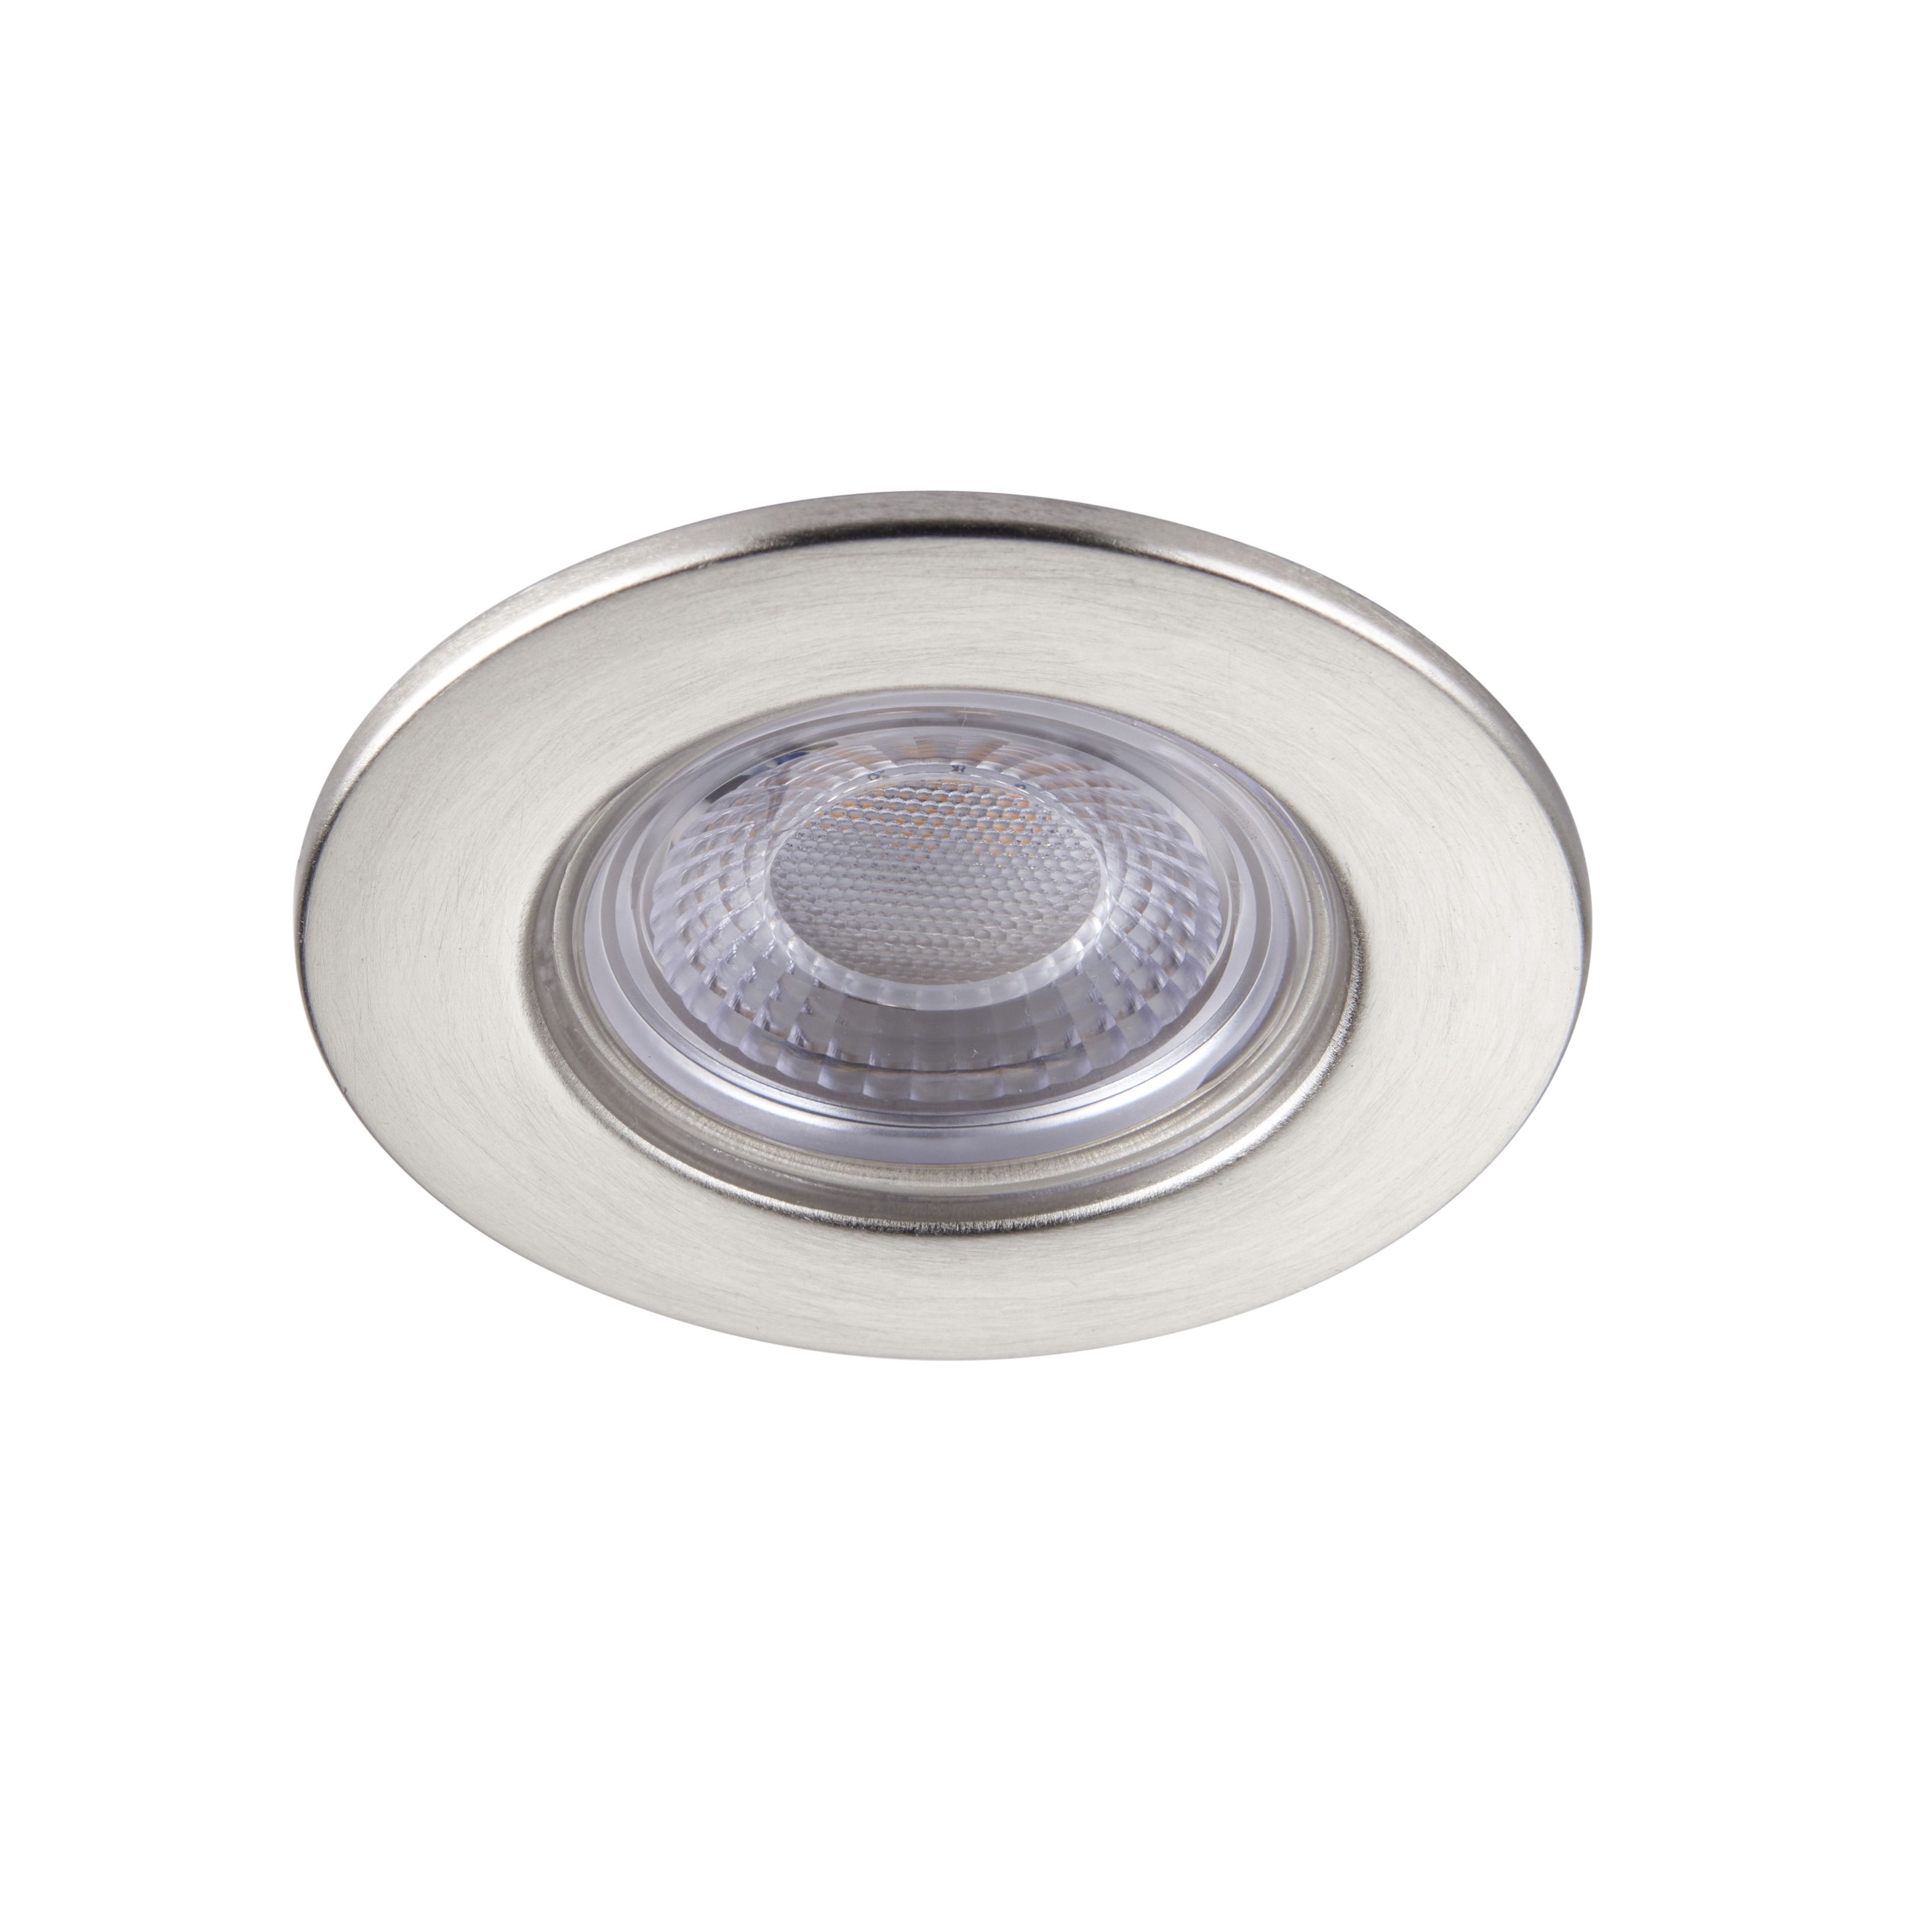 GuardECO Nickel effect Non-adjustable LED Warm white Downlight 6W IP65, Pack of 10